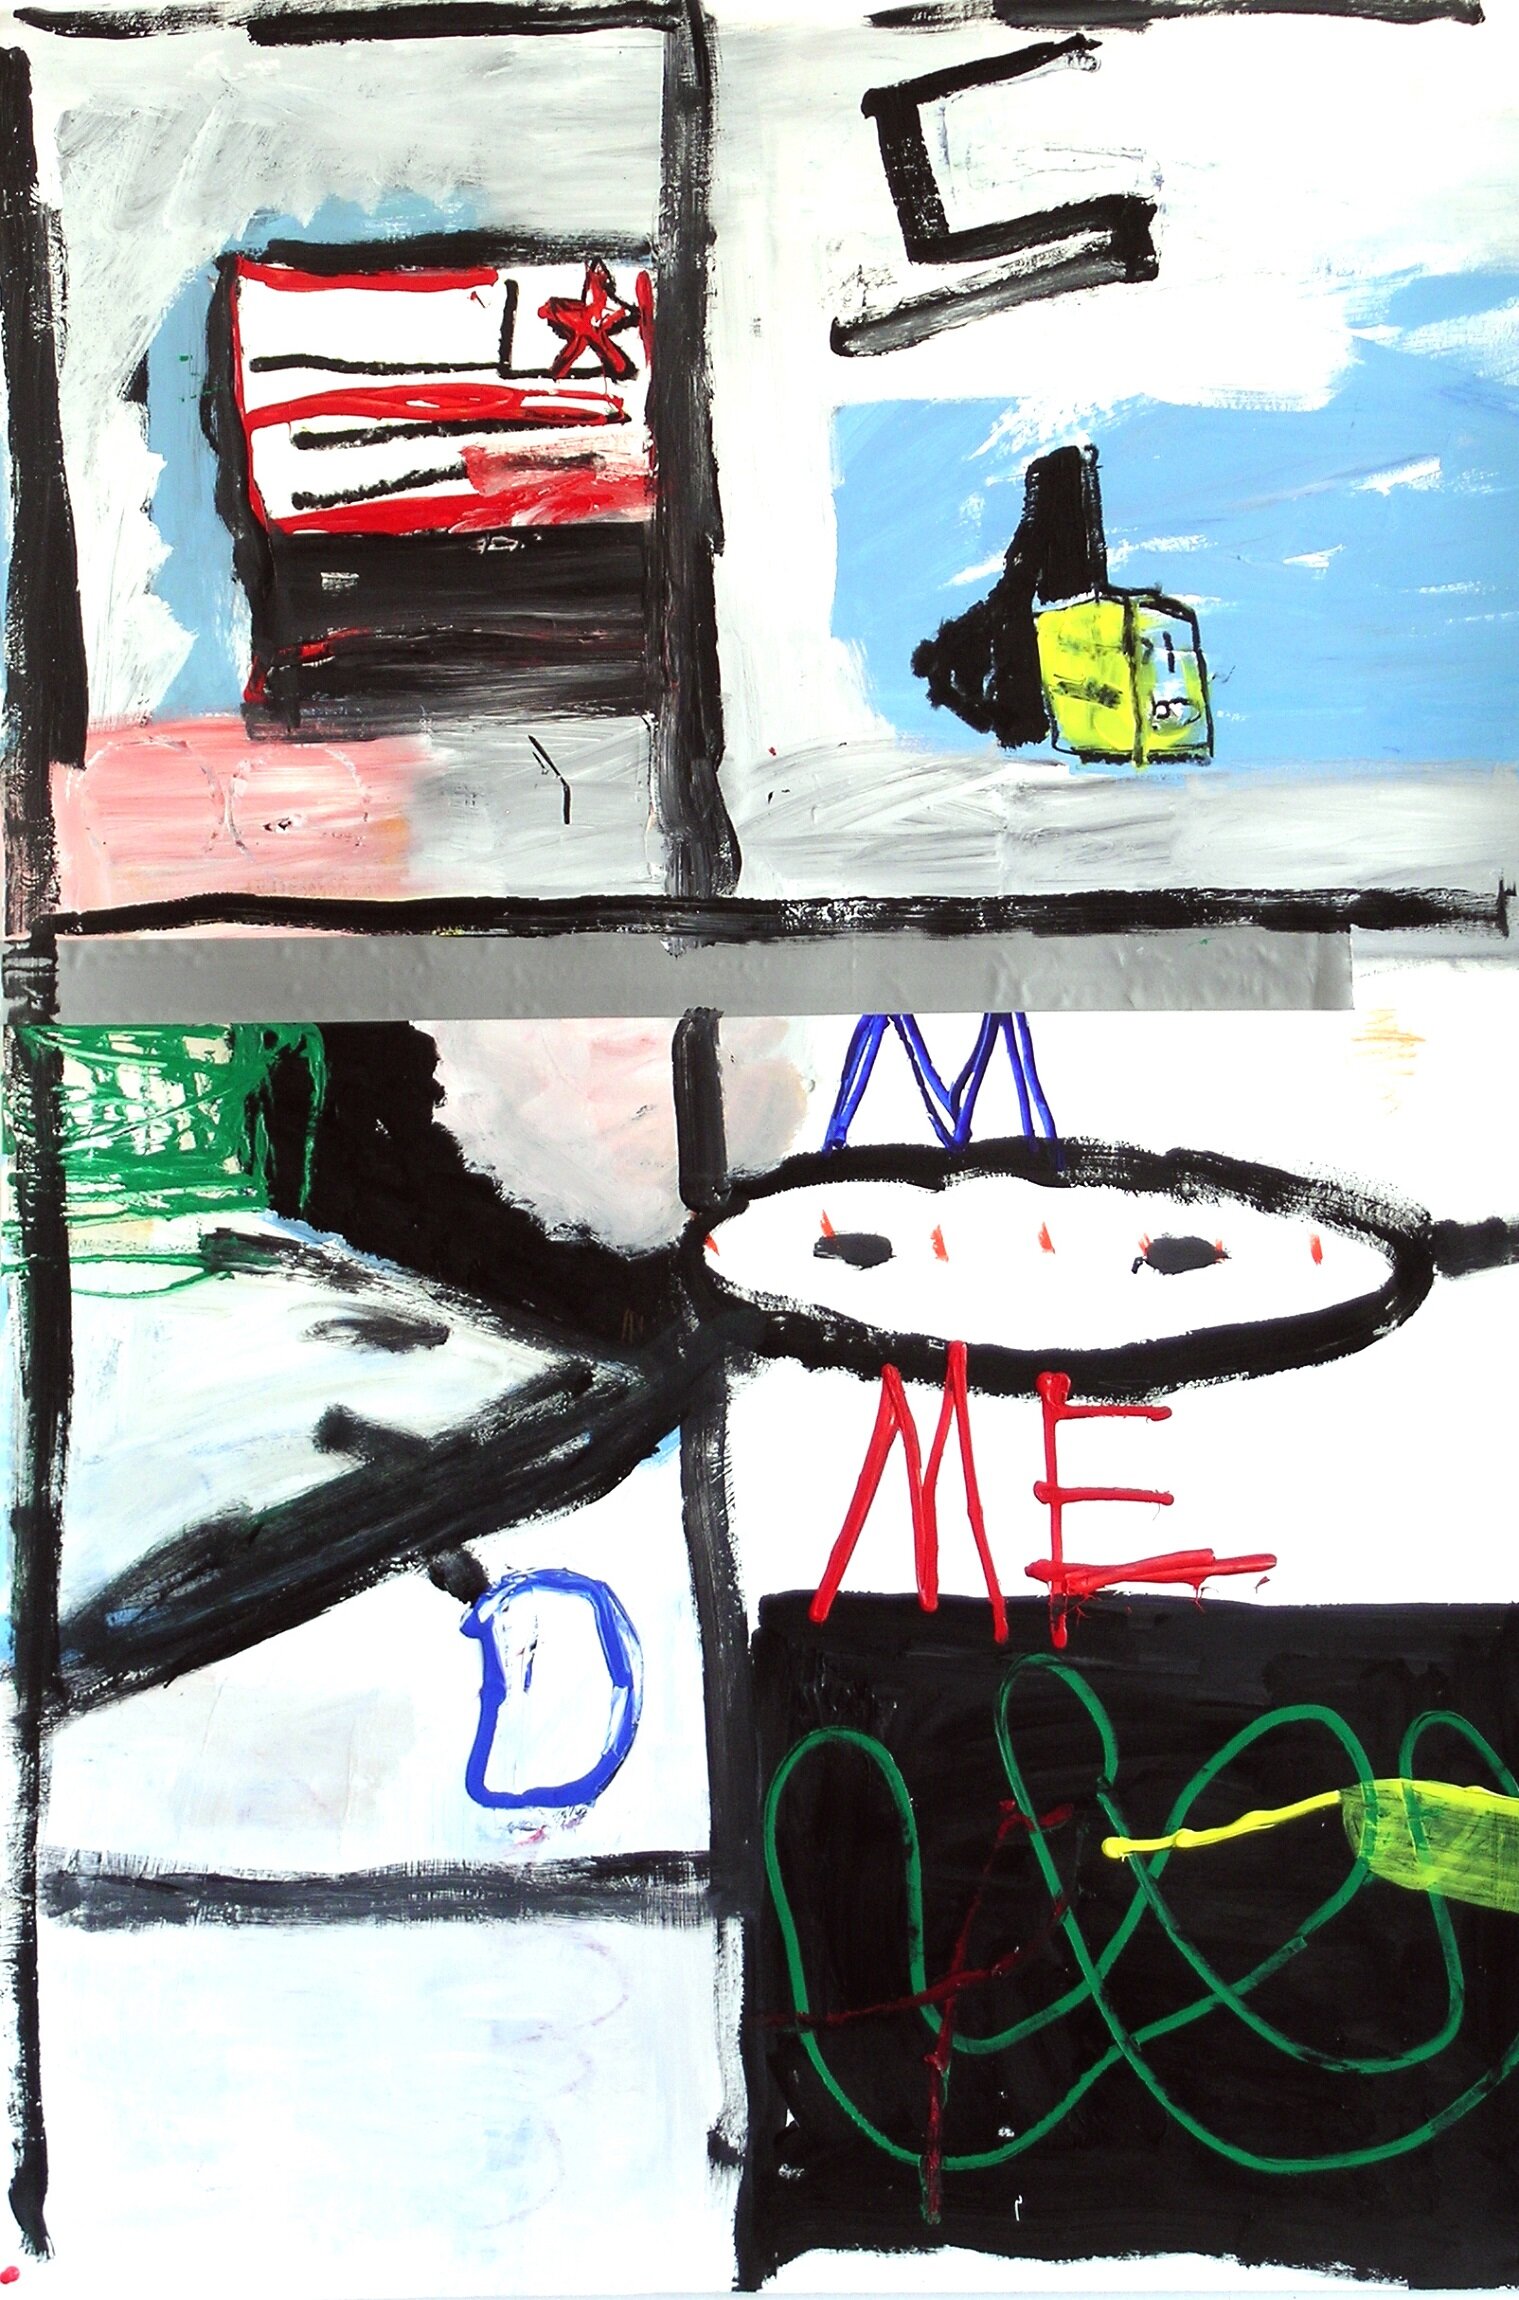  Iron Men Me Mixed Media on paper 2007 26 x 40 inches This work is Framed $3600 Available 